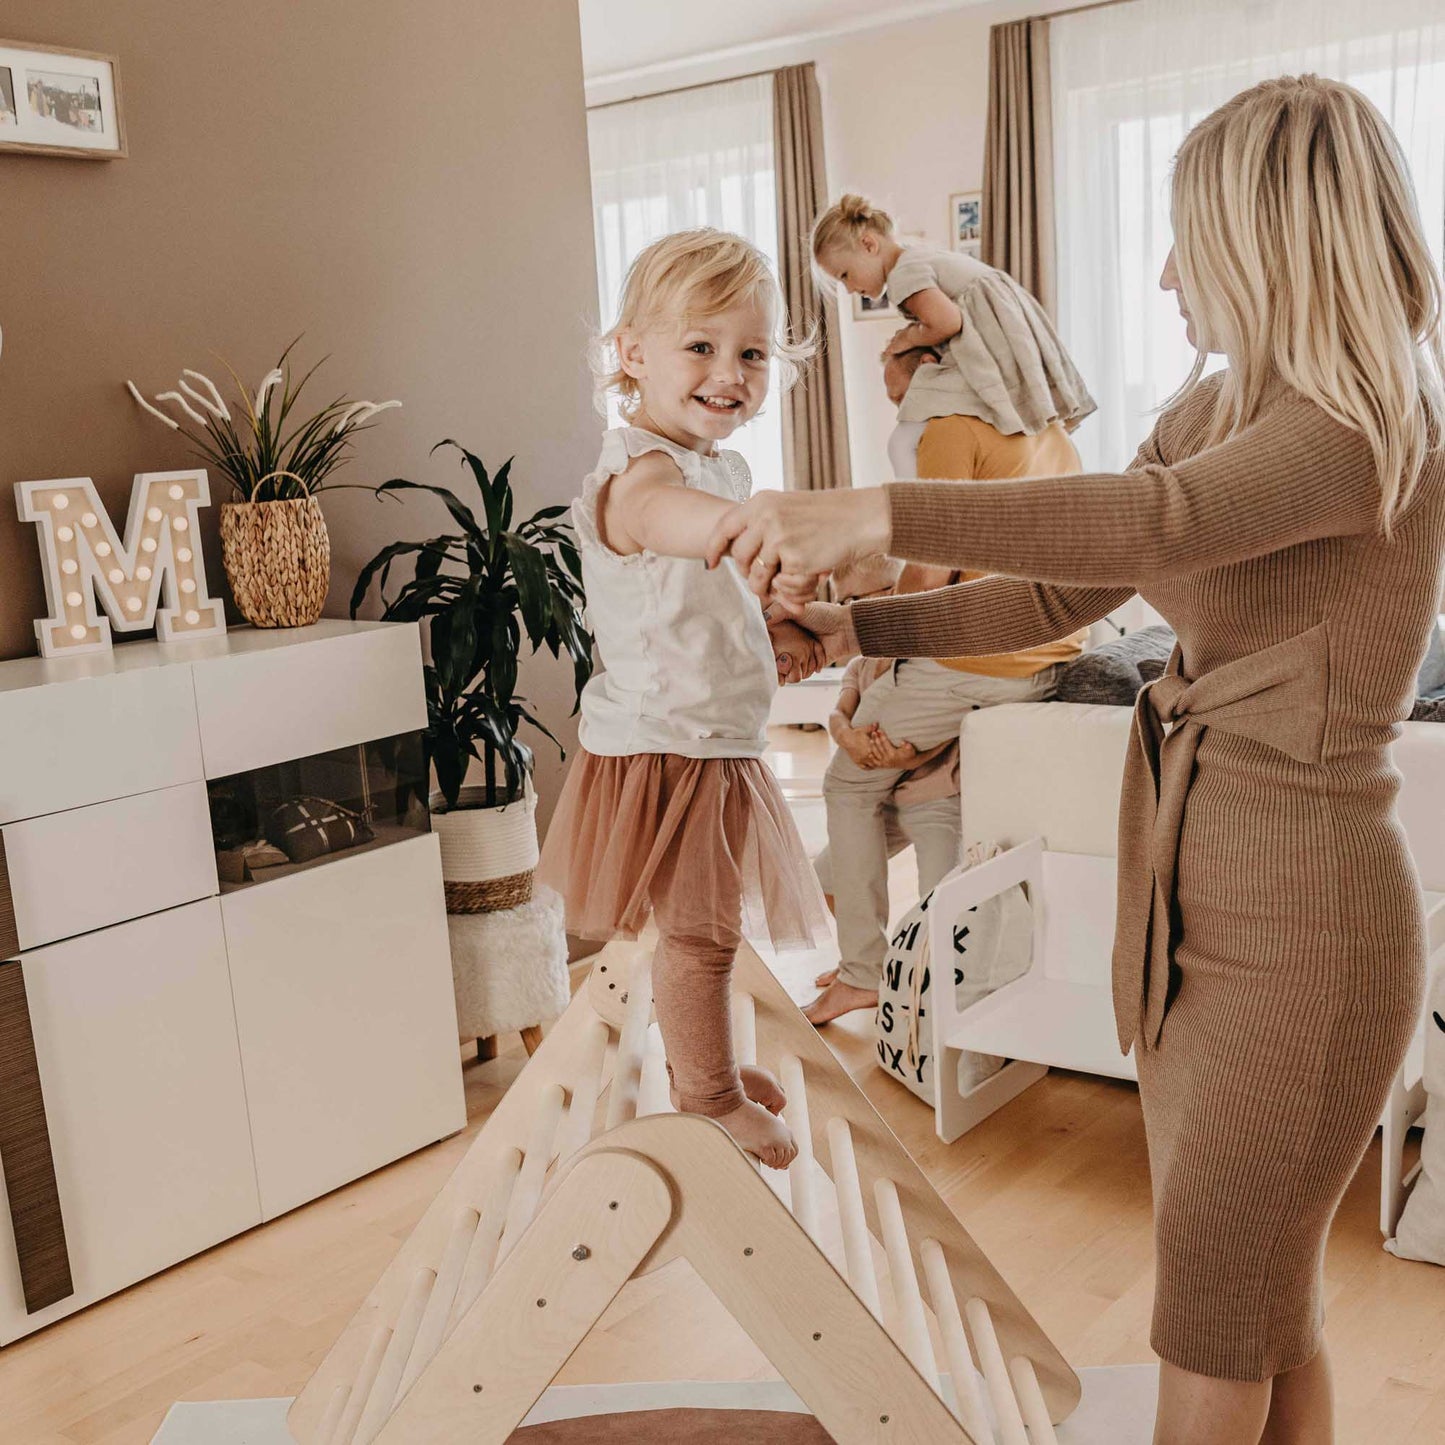 A mother and her daughter enjoying an eco-friendly Climbing Triangle + Foldable Climbing Triangle + a Ramp in their living room.